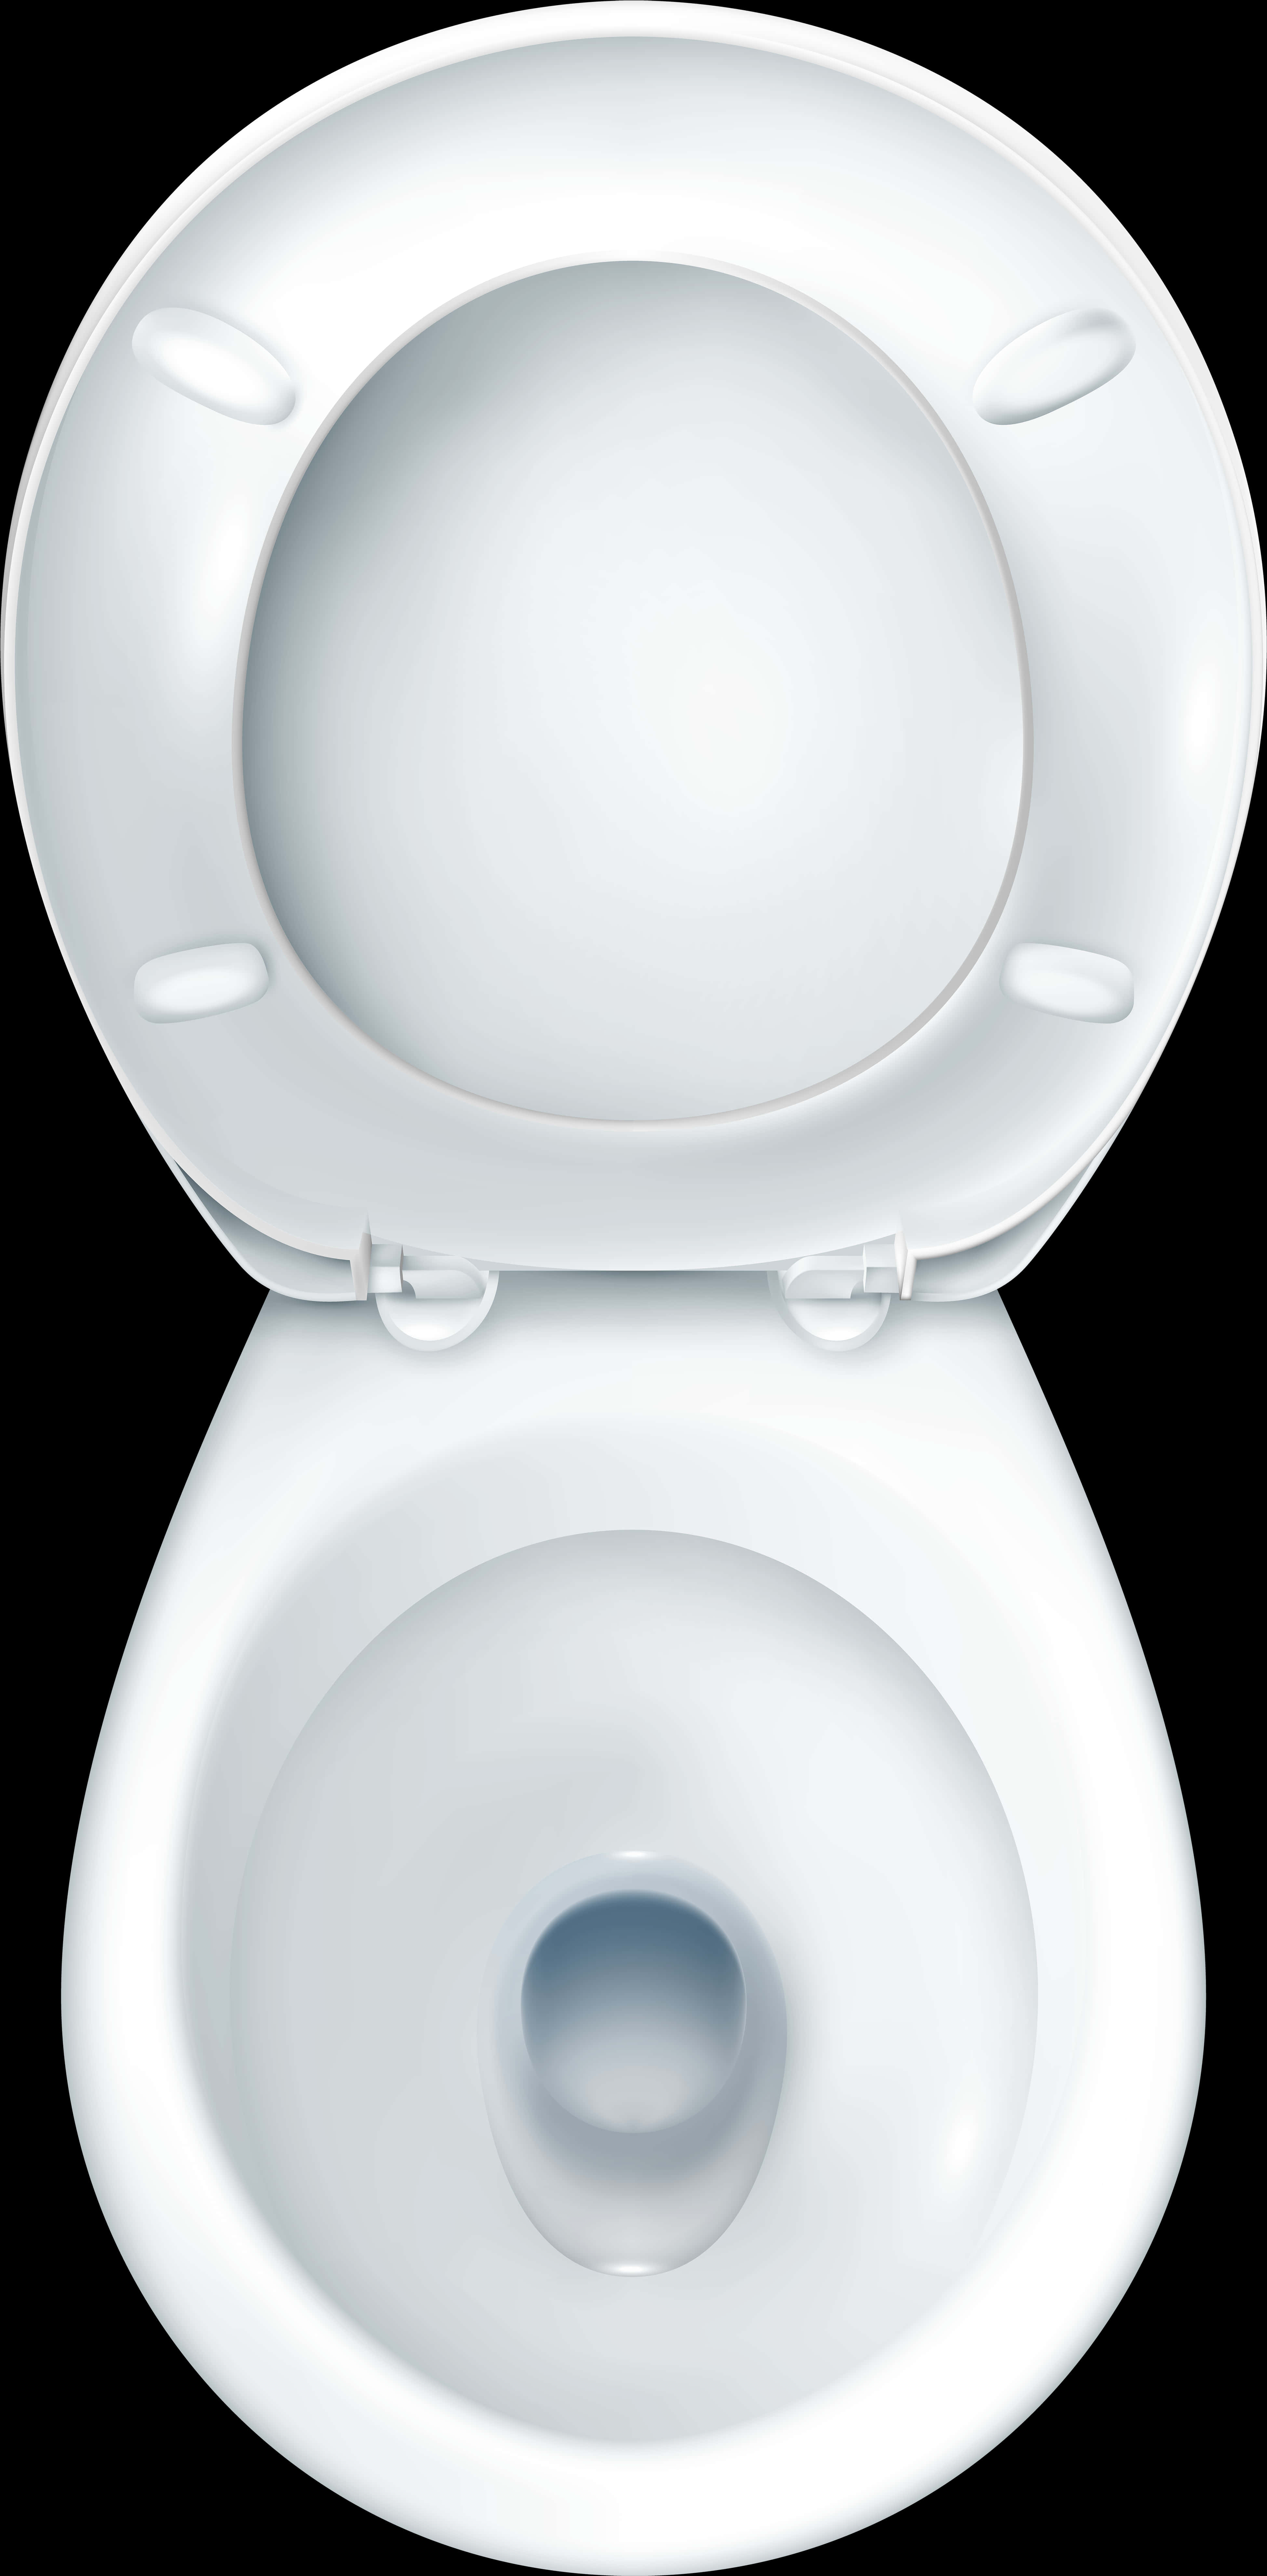 Top View Open Toilet Seat PNG image